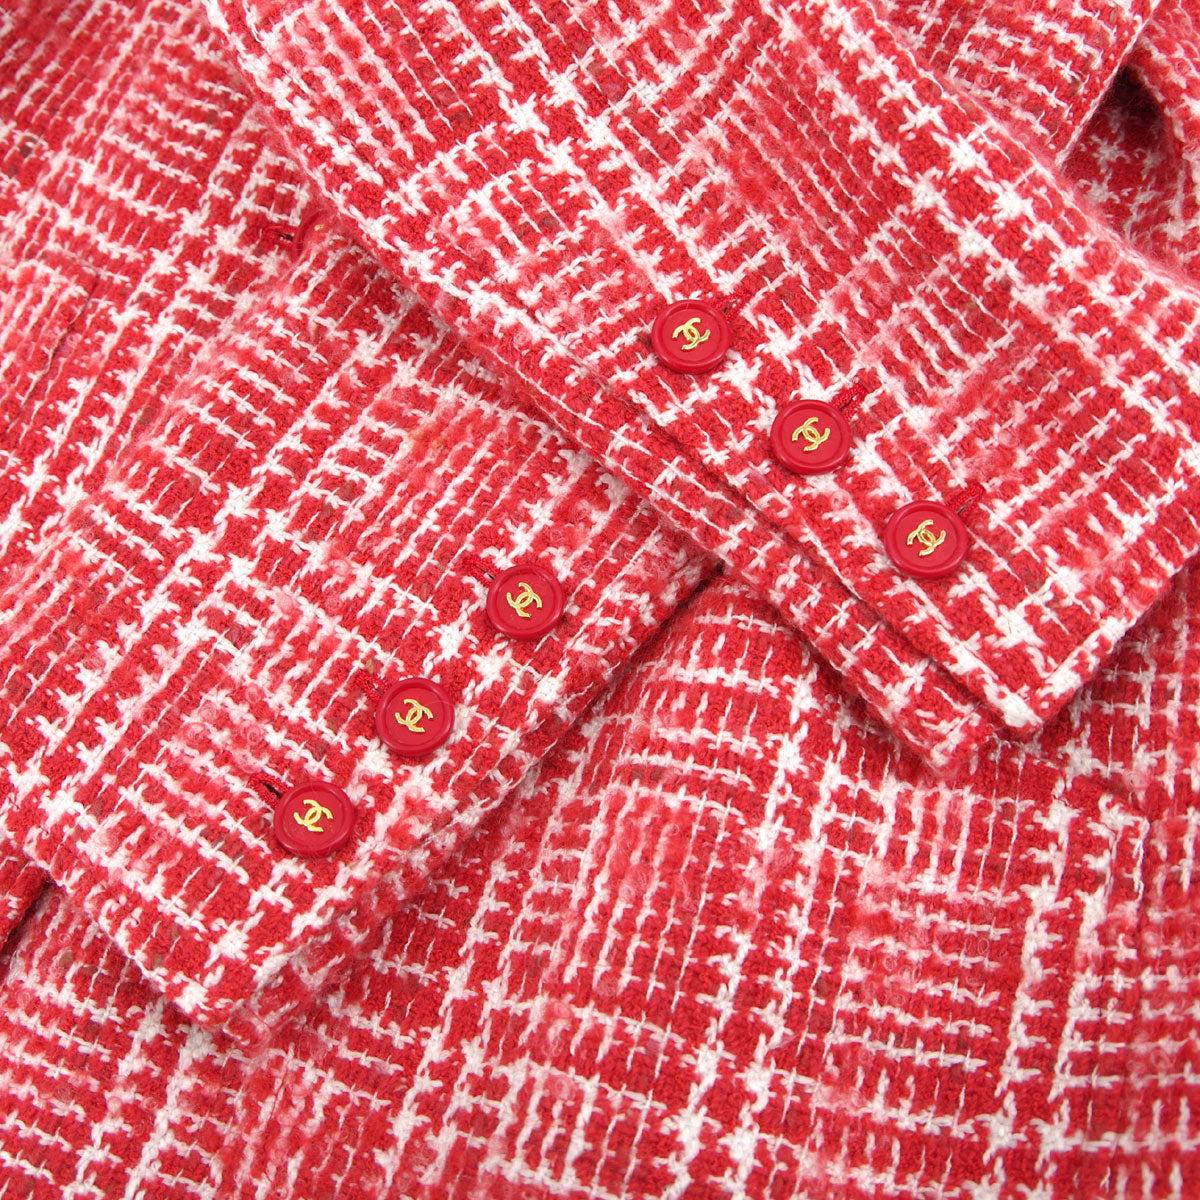 Chanel 1997 Spring Checked Tweed Blazer #42 in Red